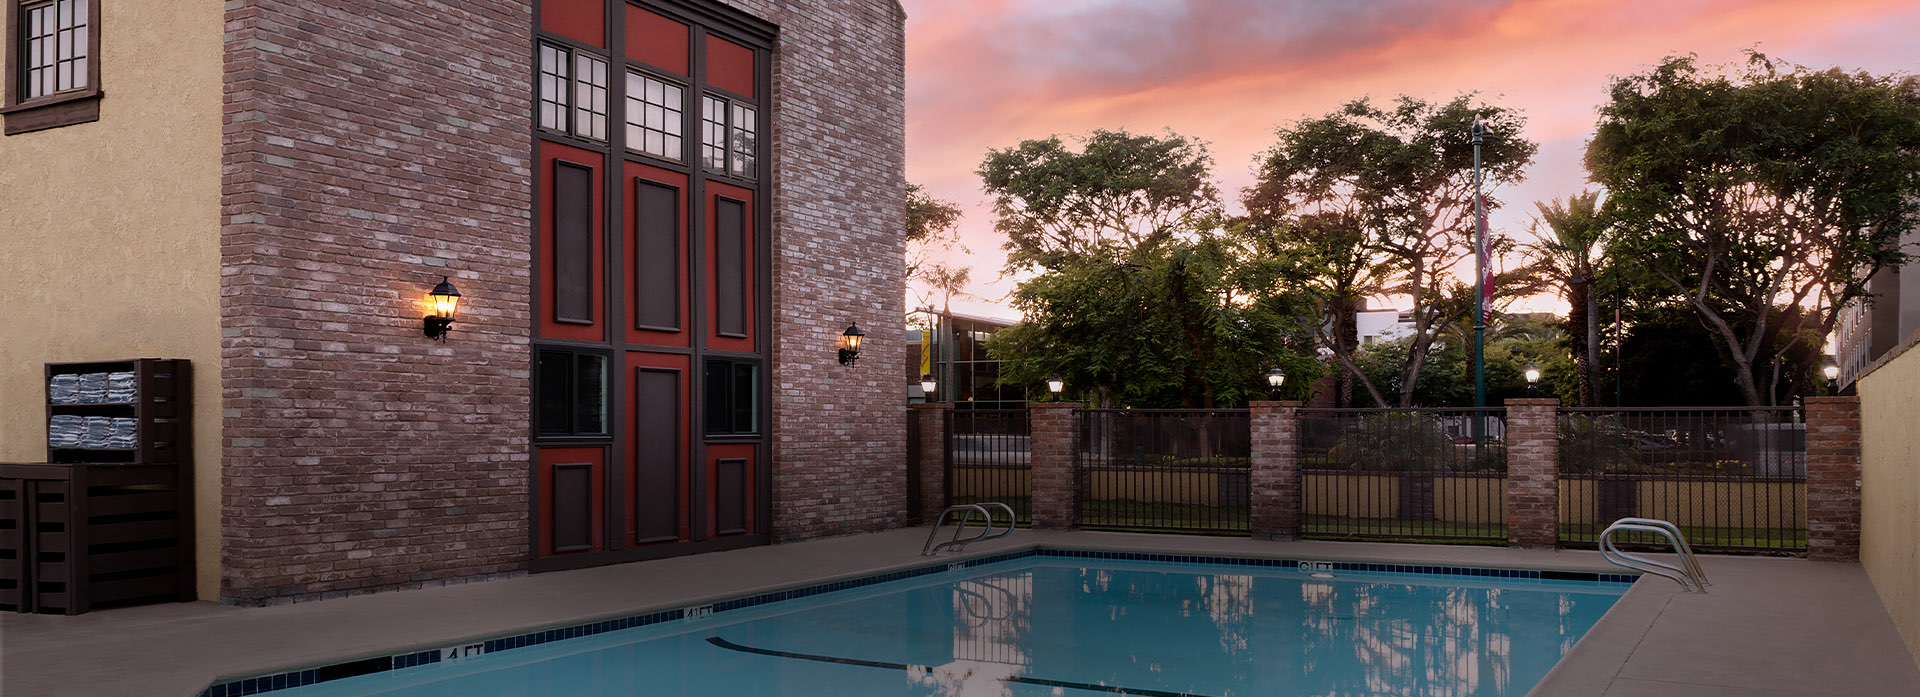 pool and brick building at sunset 